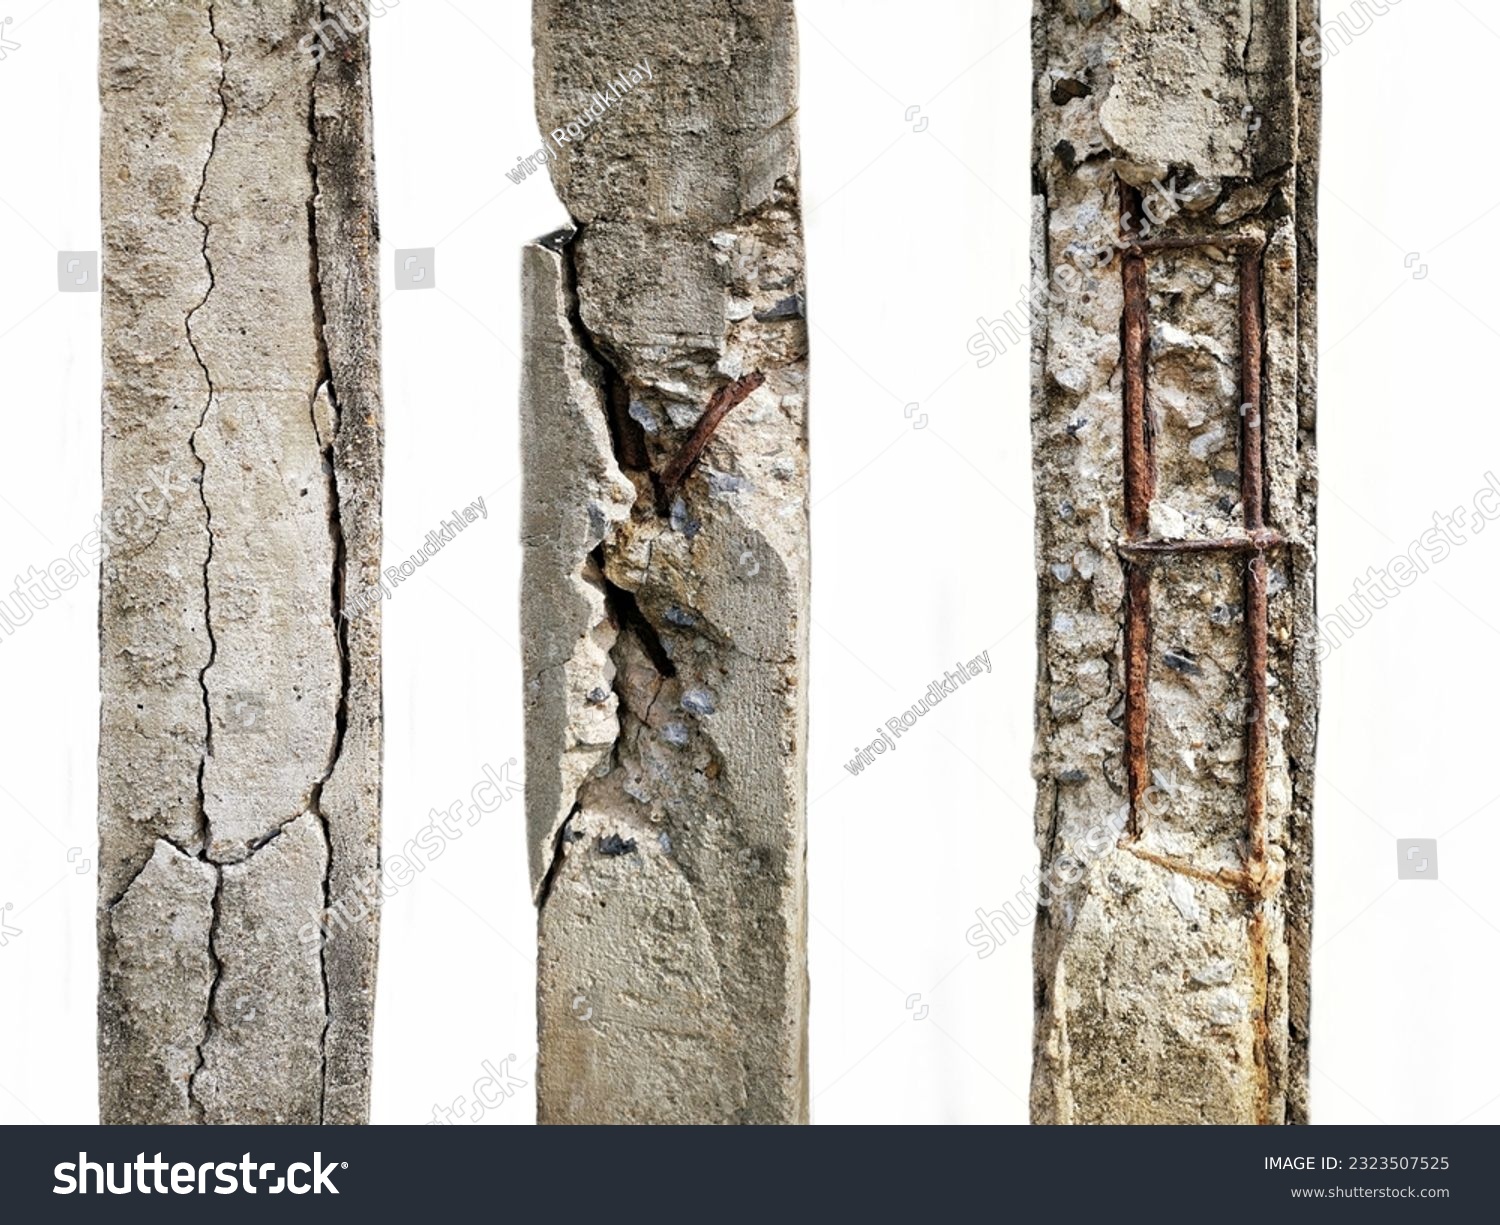 Group of Cracked concrete columns affecting the strength of the building structure isolated on white background. #2323507525